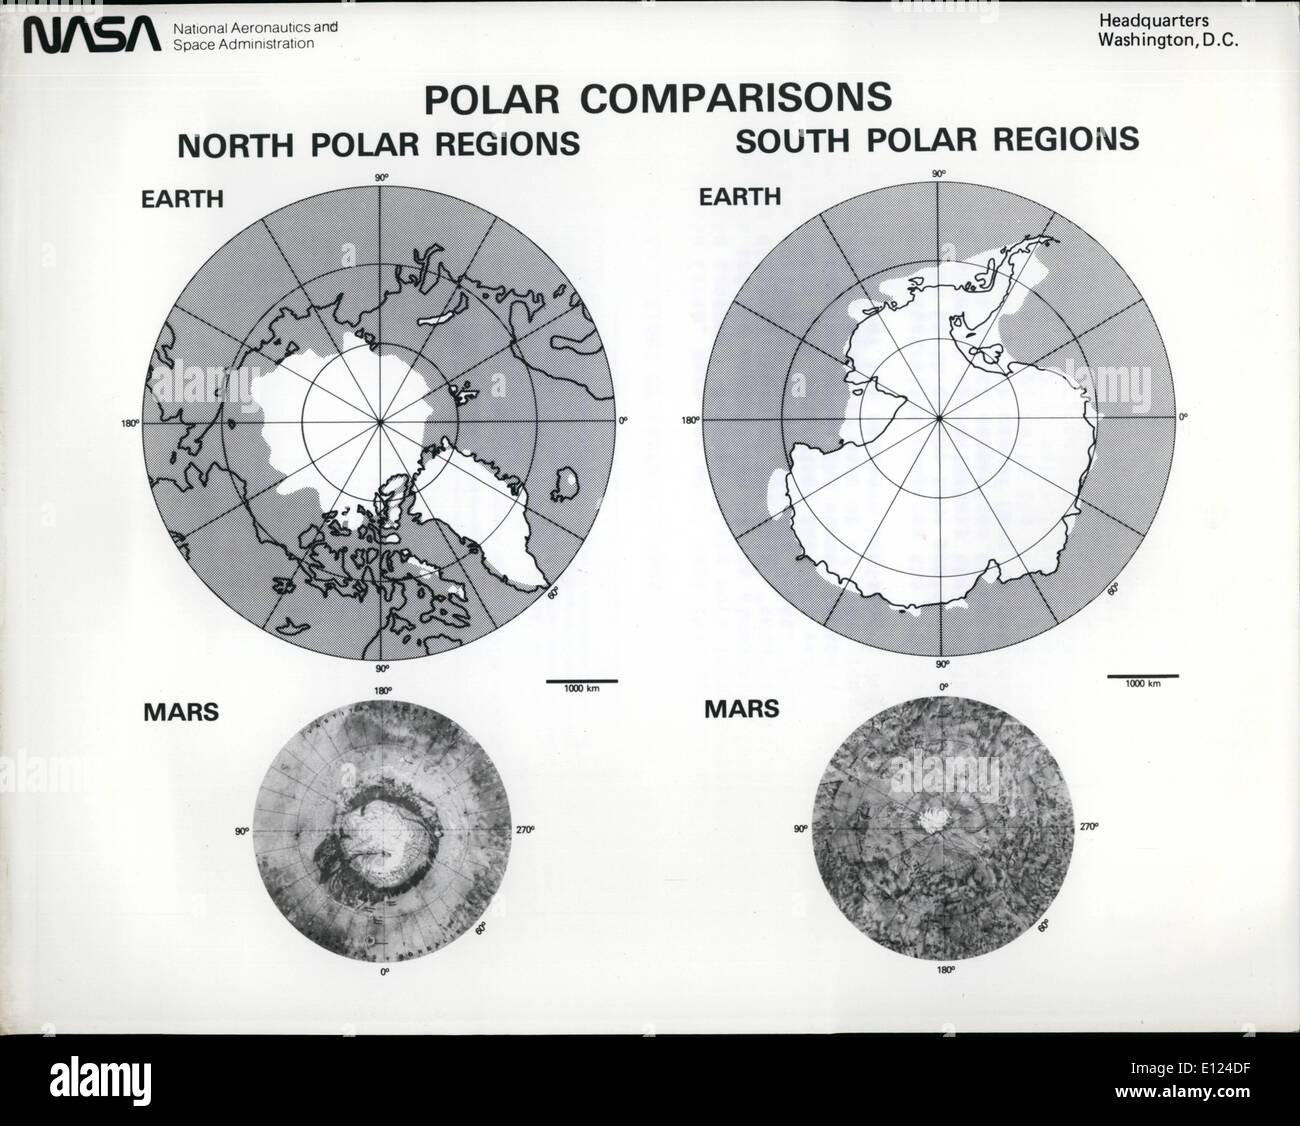 Oct. 10, 1984 - The Polar Regions of Earth and Mars: Like the Earth, Mars has polar caps that wax and wane with the seasons. Because of the much lower temperatures on Mars and the composition of its atmosphere (primarily carbon dioxide), most of its polar ''snow' is actually a thin coating of carbon dioxide frost. However, spacecraft measurements have determined that the small residual ice cap that remains during the summer season in the northern hemisphere is actually made up of water ice. The same is probably true of the southern hemisphere ice cap Stock Photo